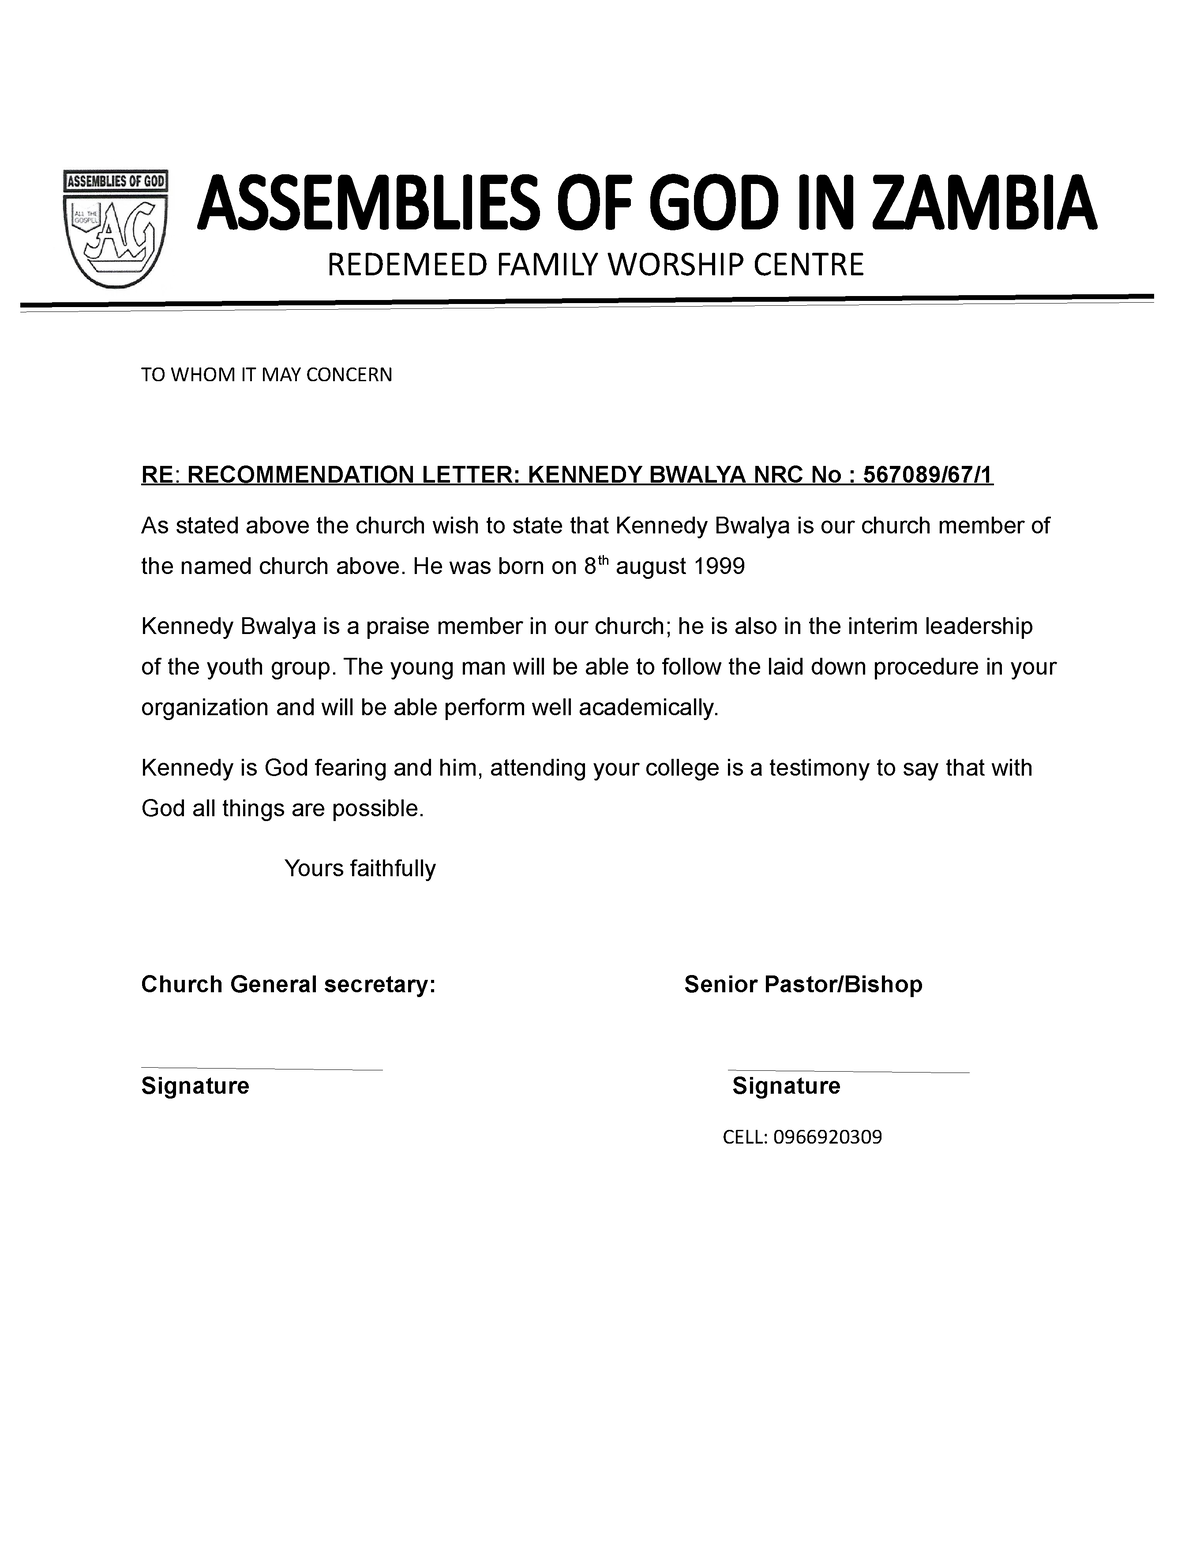 Harded Paper Assemblies OF GOD IN Zambia - REDEMEED FAMILY WORSHIP ...